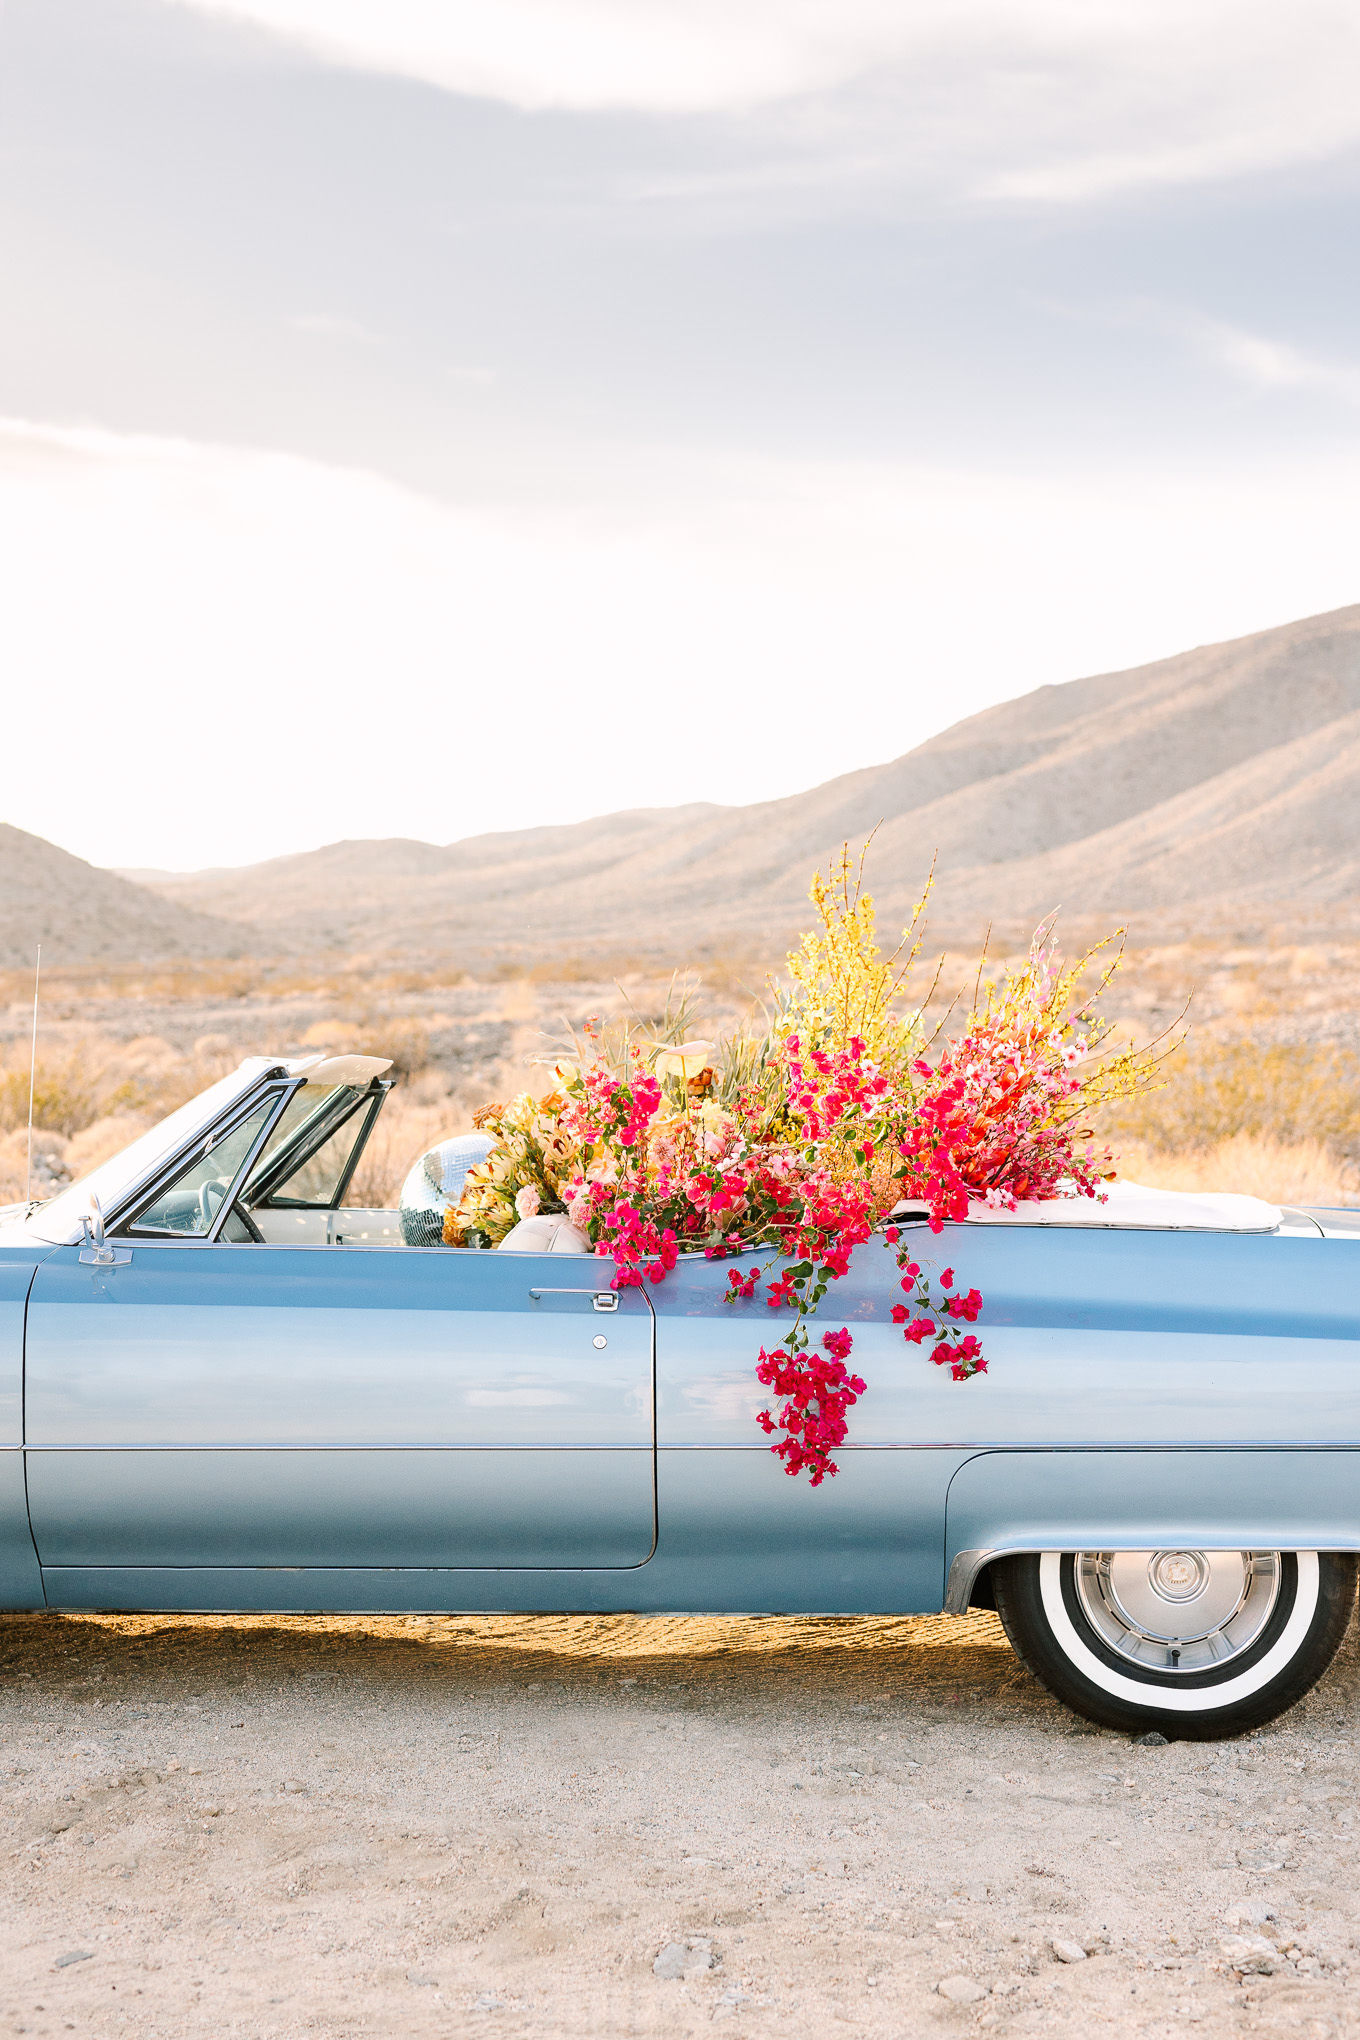 Blue classic Cadillac filled with flowers and disco balls | Kindred Presets x Mary Costa Photography Palm Springs Ad Campaign | Colorful Palm Springs wedding photography | #palmspringsphotographer #lightroompresets #sandshotel #pinkhotel   Source: Mary Costa Photography | Los Angeles